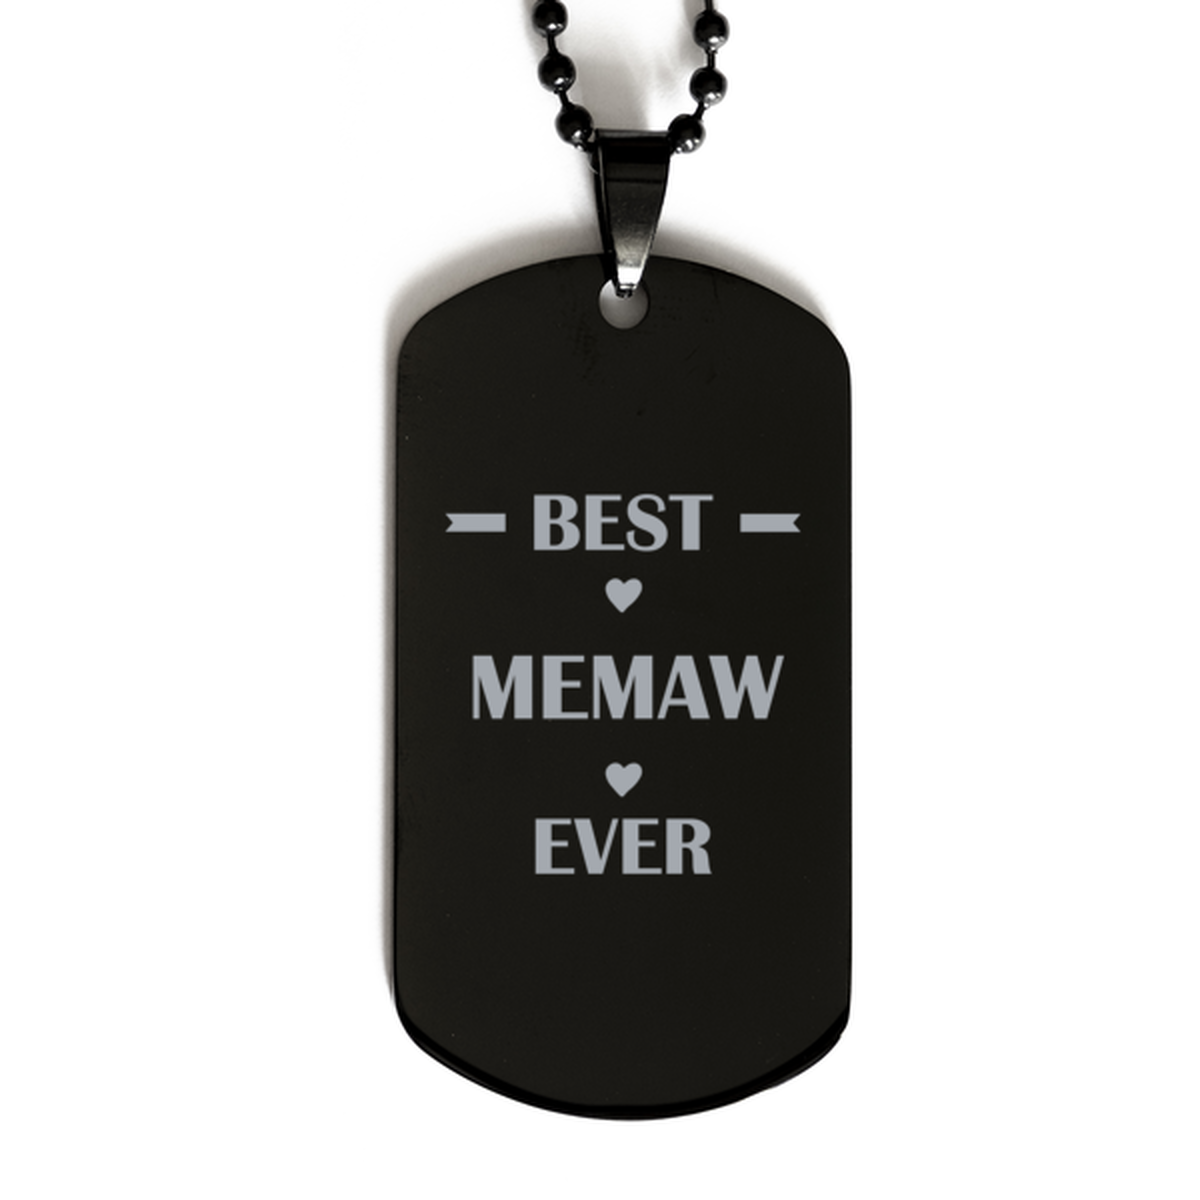 Best Memaw Ever Memaw Gifts, Funny Black Dog Tag For Memaw, Birthday Family Presents Engraved Necklace For Women